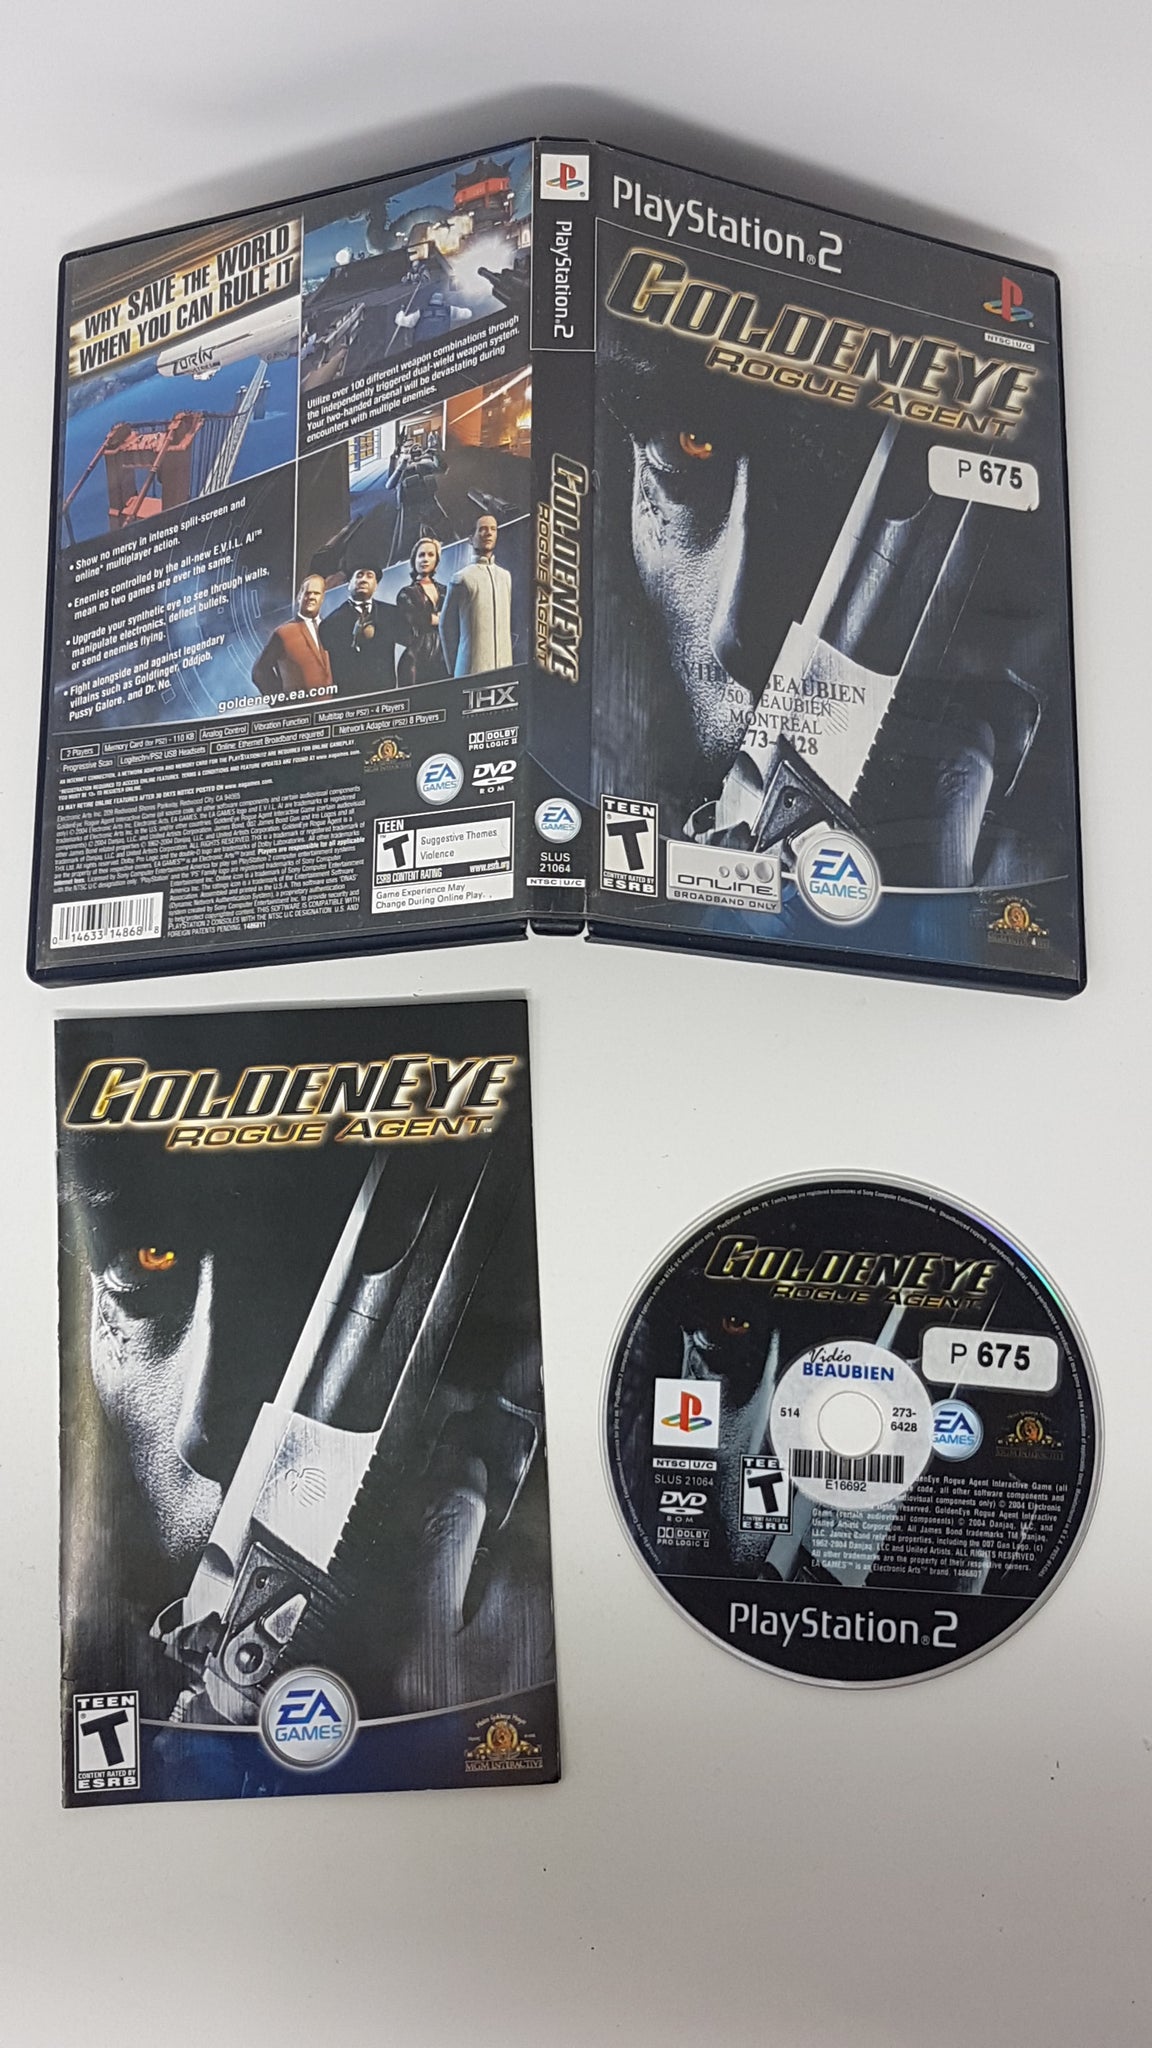 Goldeneye Rogue Agent Sony Playstation 2 Game